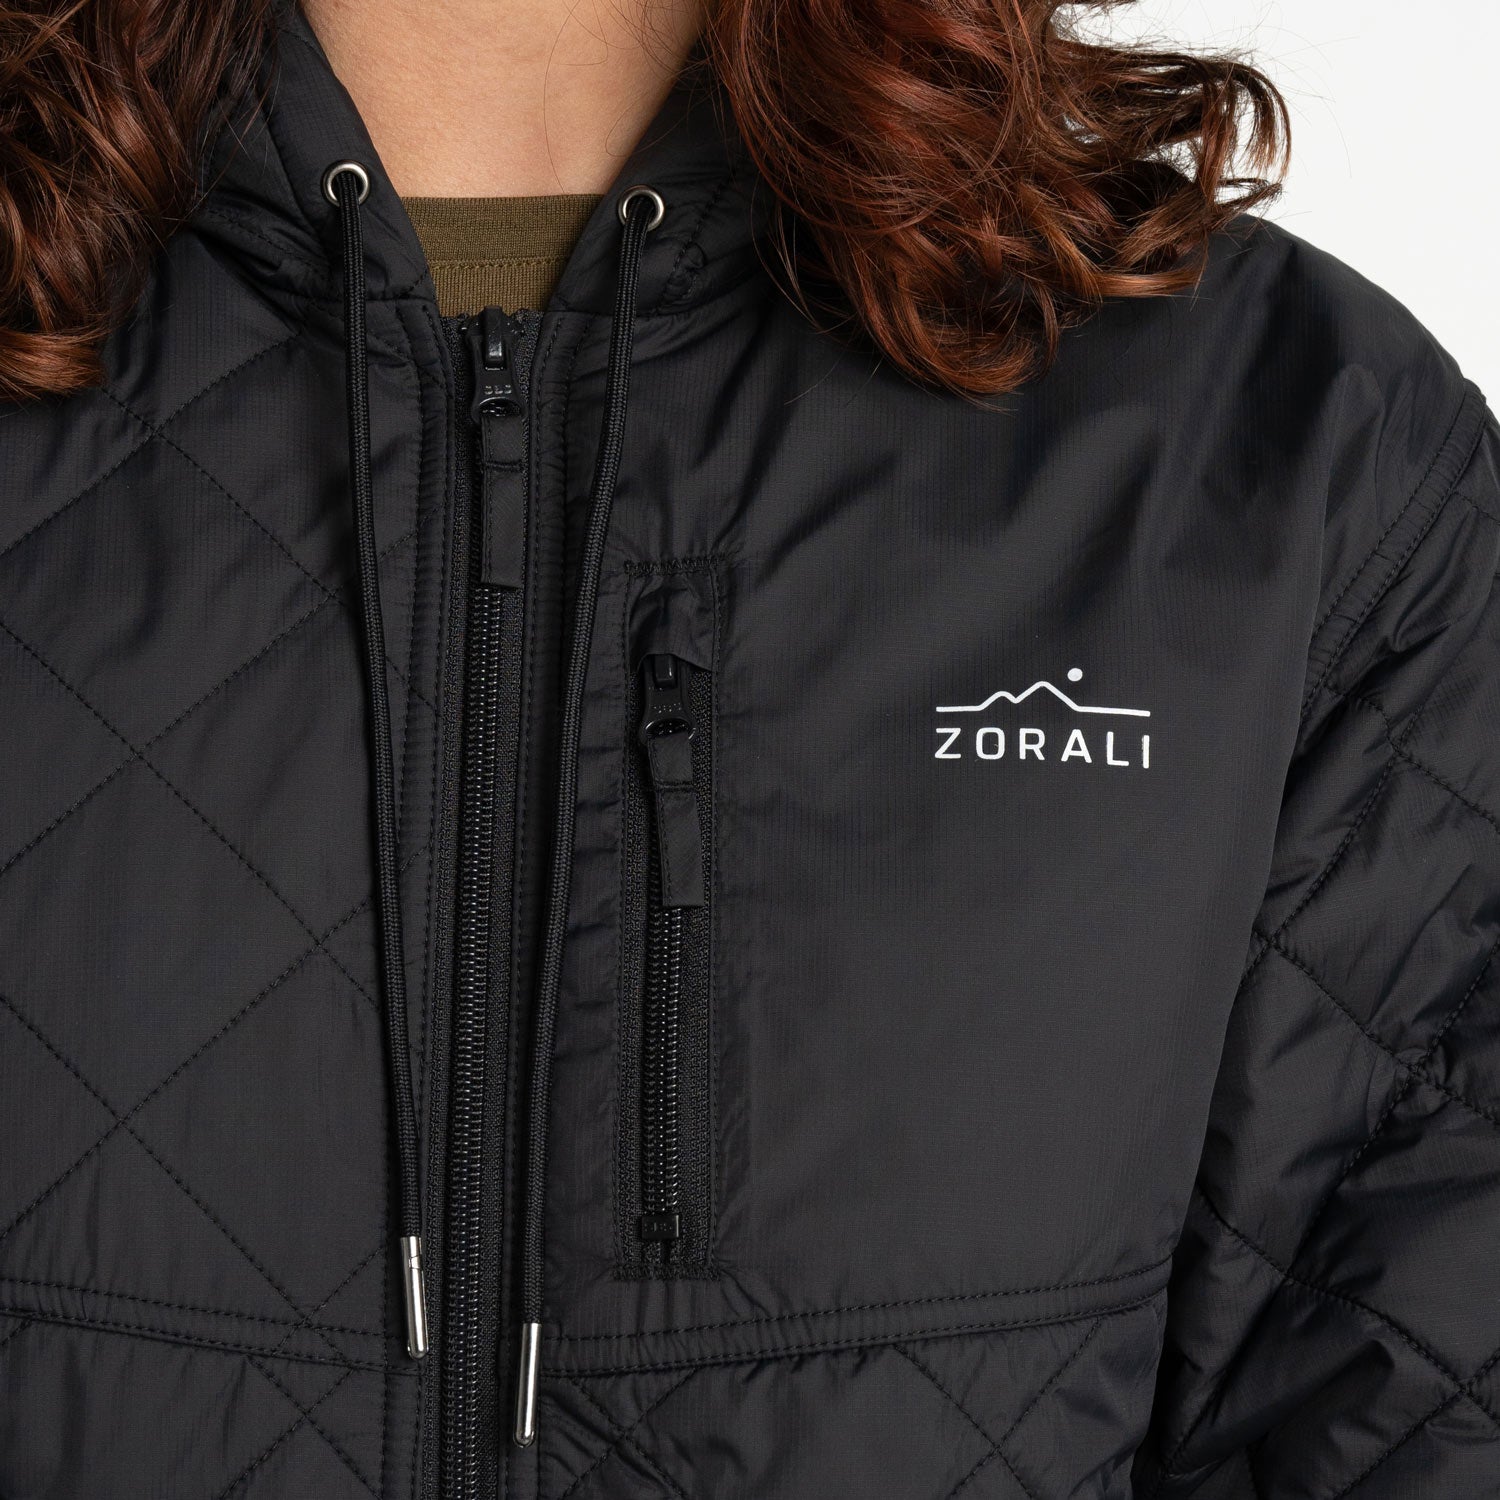 Womens Insulated Jacket Black